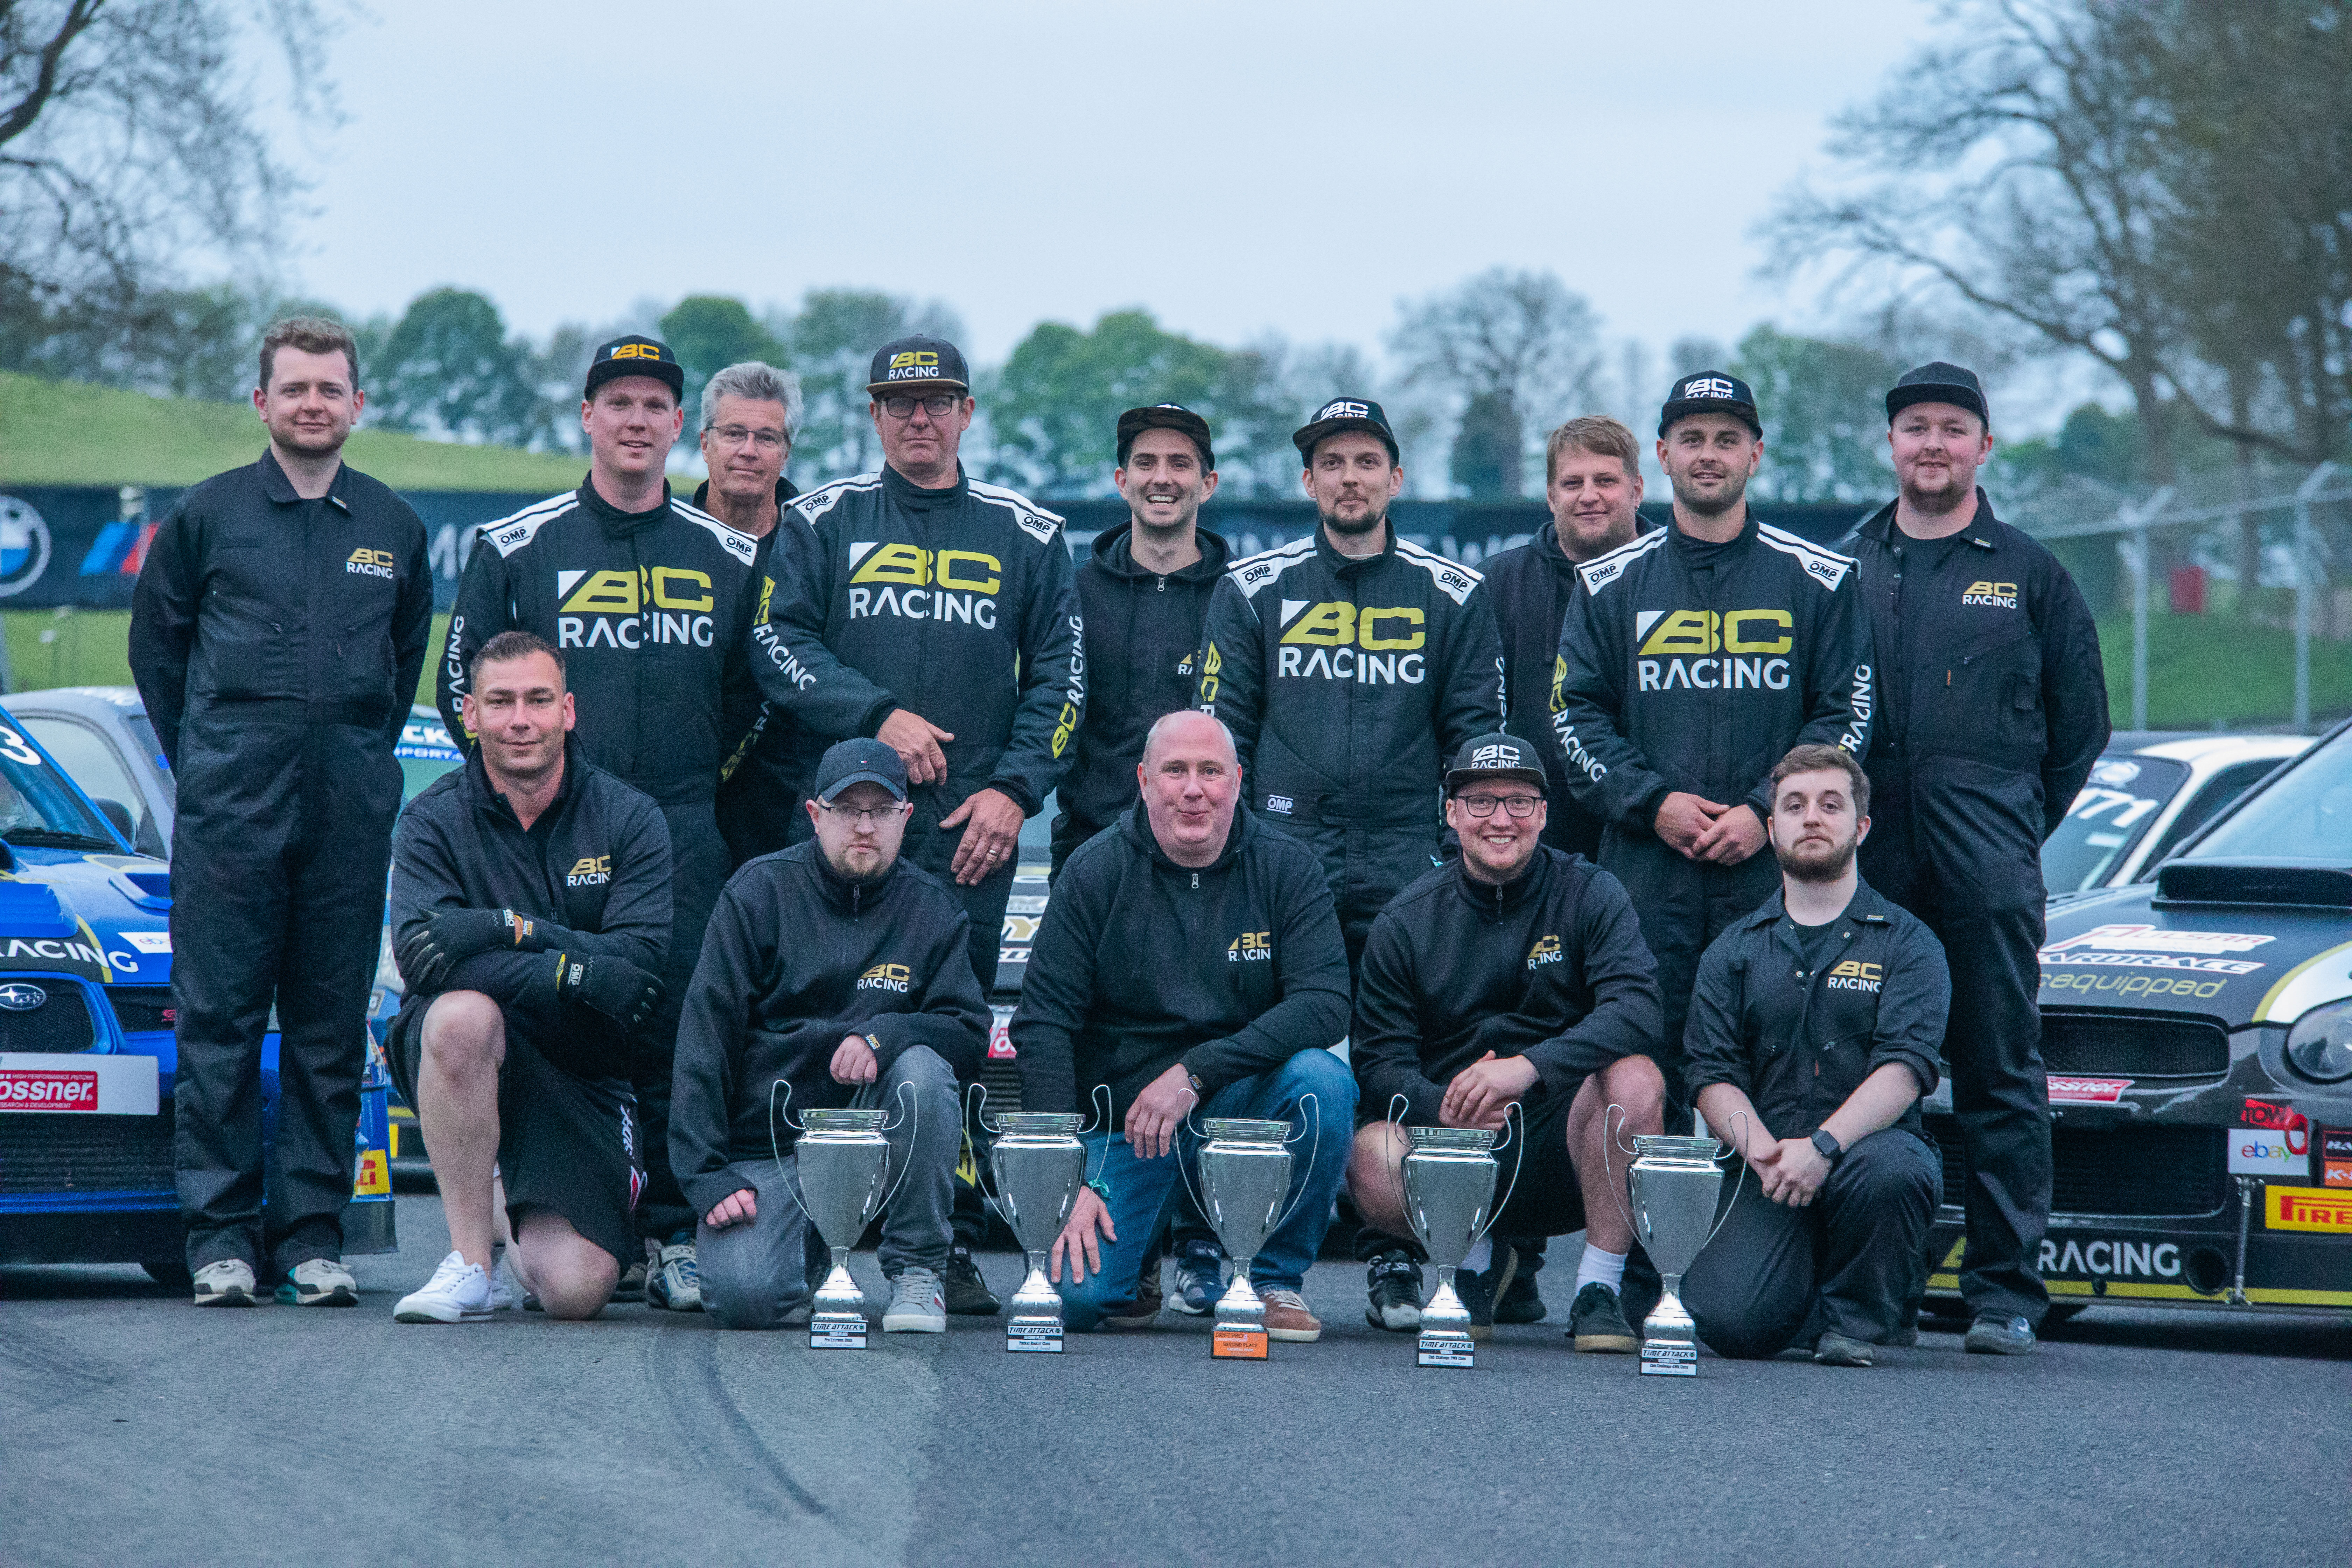 Podiums aplenty for Team BC Racing in Time Attack’s season opener 